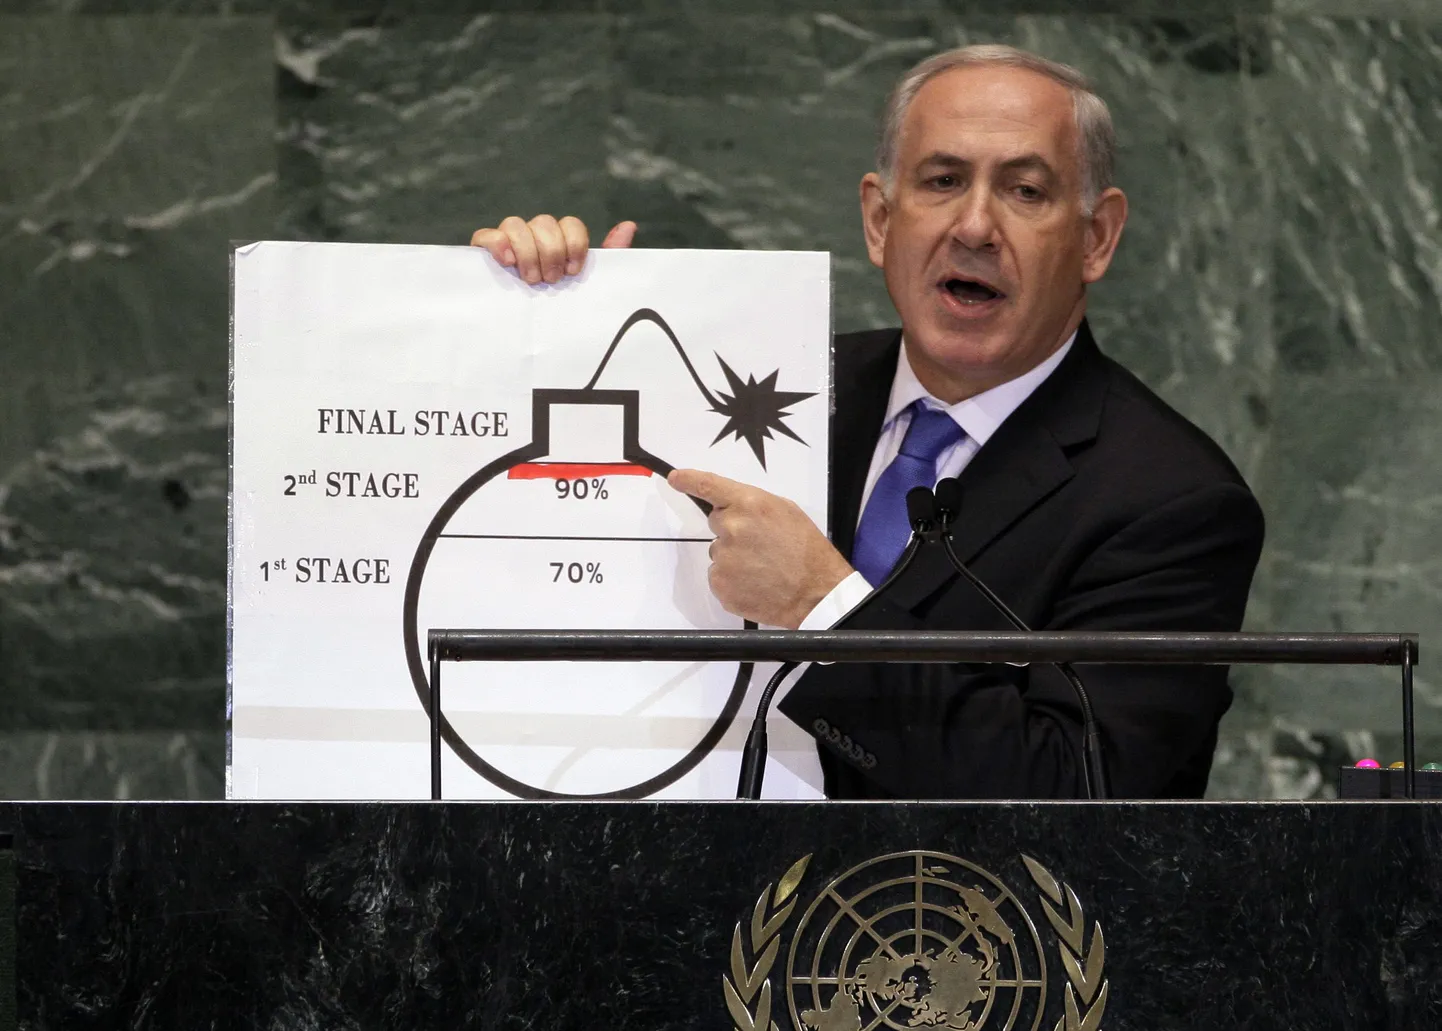 File - In this Sept. 27, 2012 file photo, Prime Minister Benjamin Netanyahu of Israel shows an illustration as he describes his concerns over Iran's nuclear ambitions during his address to the 67th session of the United Nations General Assembly at U.N. headquarters. Israeli Prime Minister Benjamin Netanyahu provided the U.N. with a memorable moment with a cartoon bomb a year ago, and he can be expected to again call for a hard line against Iran's nuclear program backed by the credible threat of force. But the goalposts have moved a little: some at the General Assembly's annual meeting will be calling for a more nuanced approach by the world in response to the emergence of a moderate Iranian president. (AP Photo/Richard Drew, File) / SCANPIX Code: 436